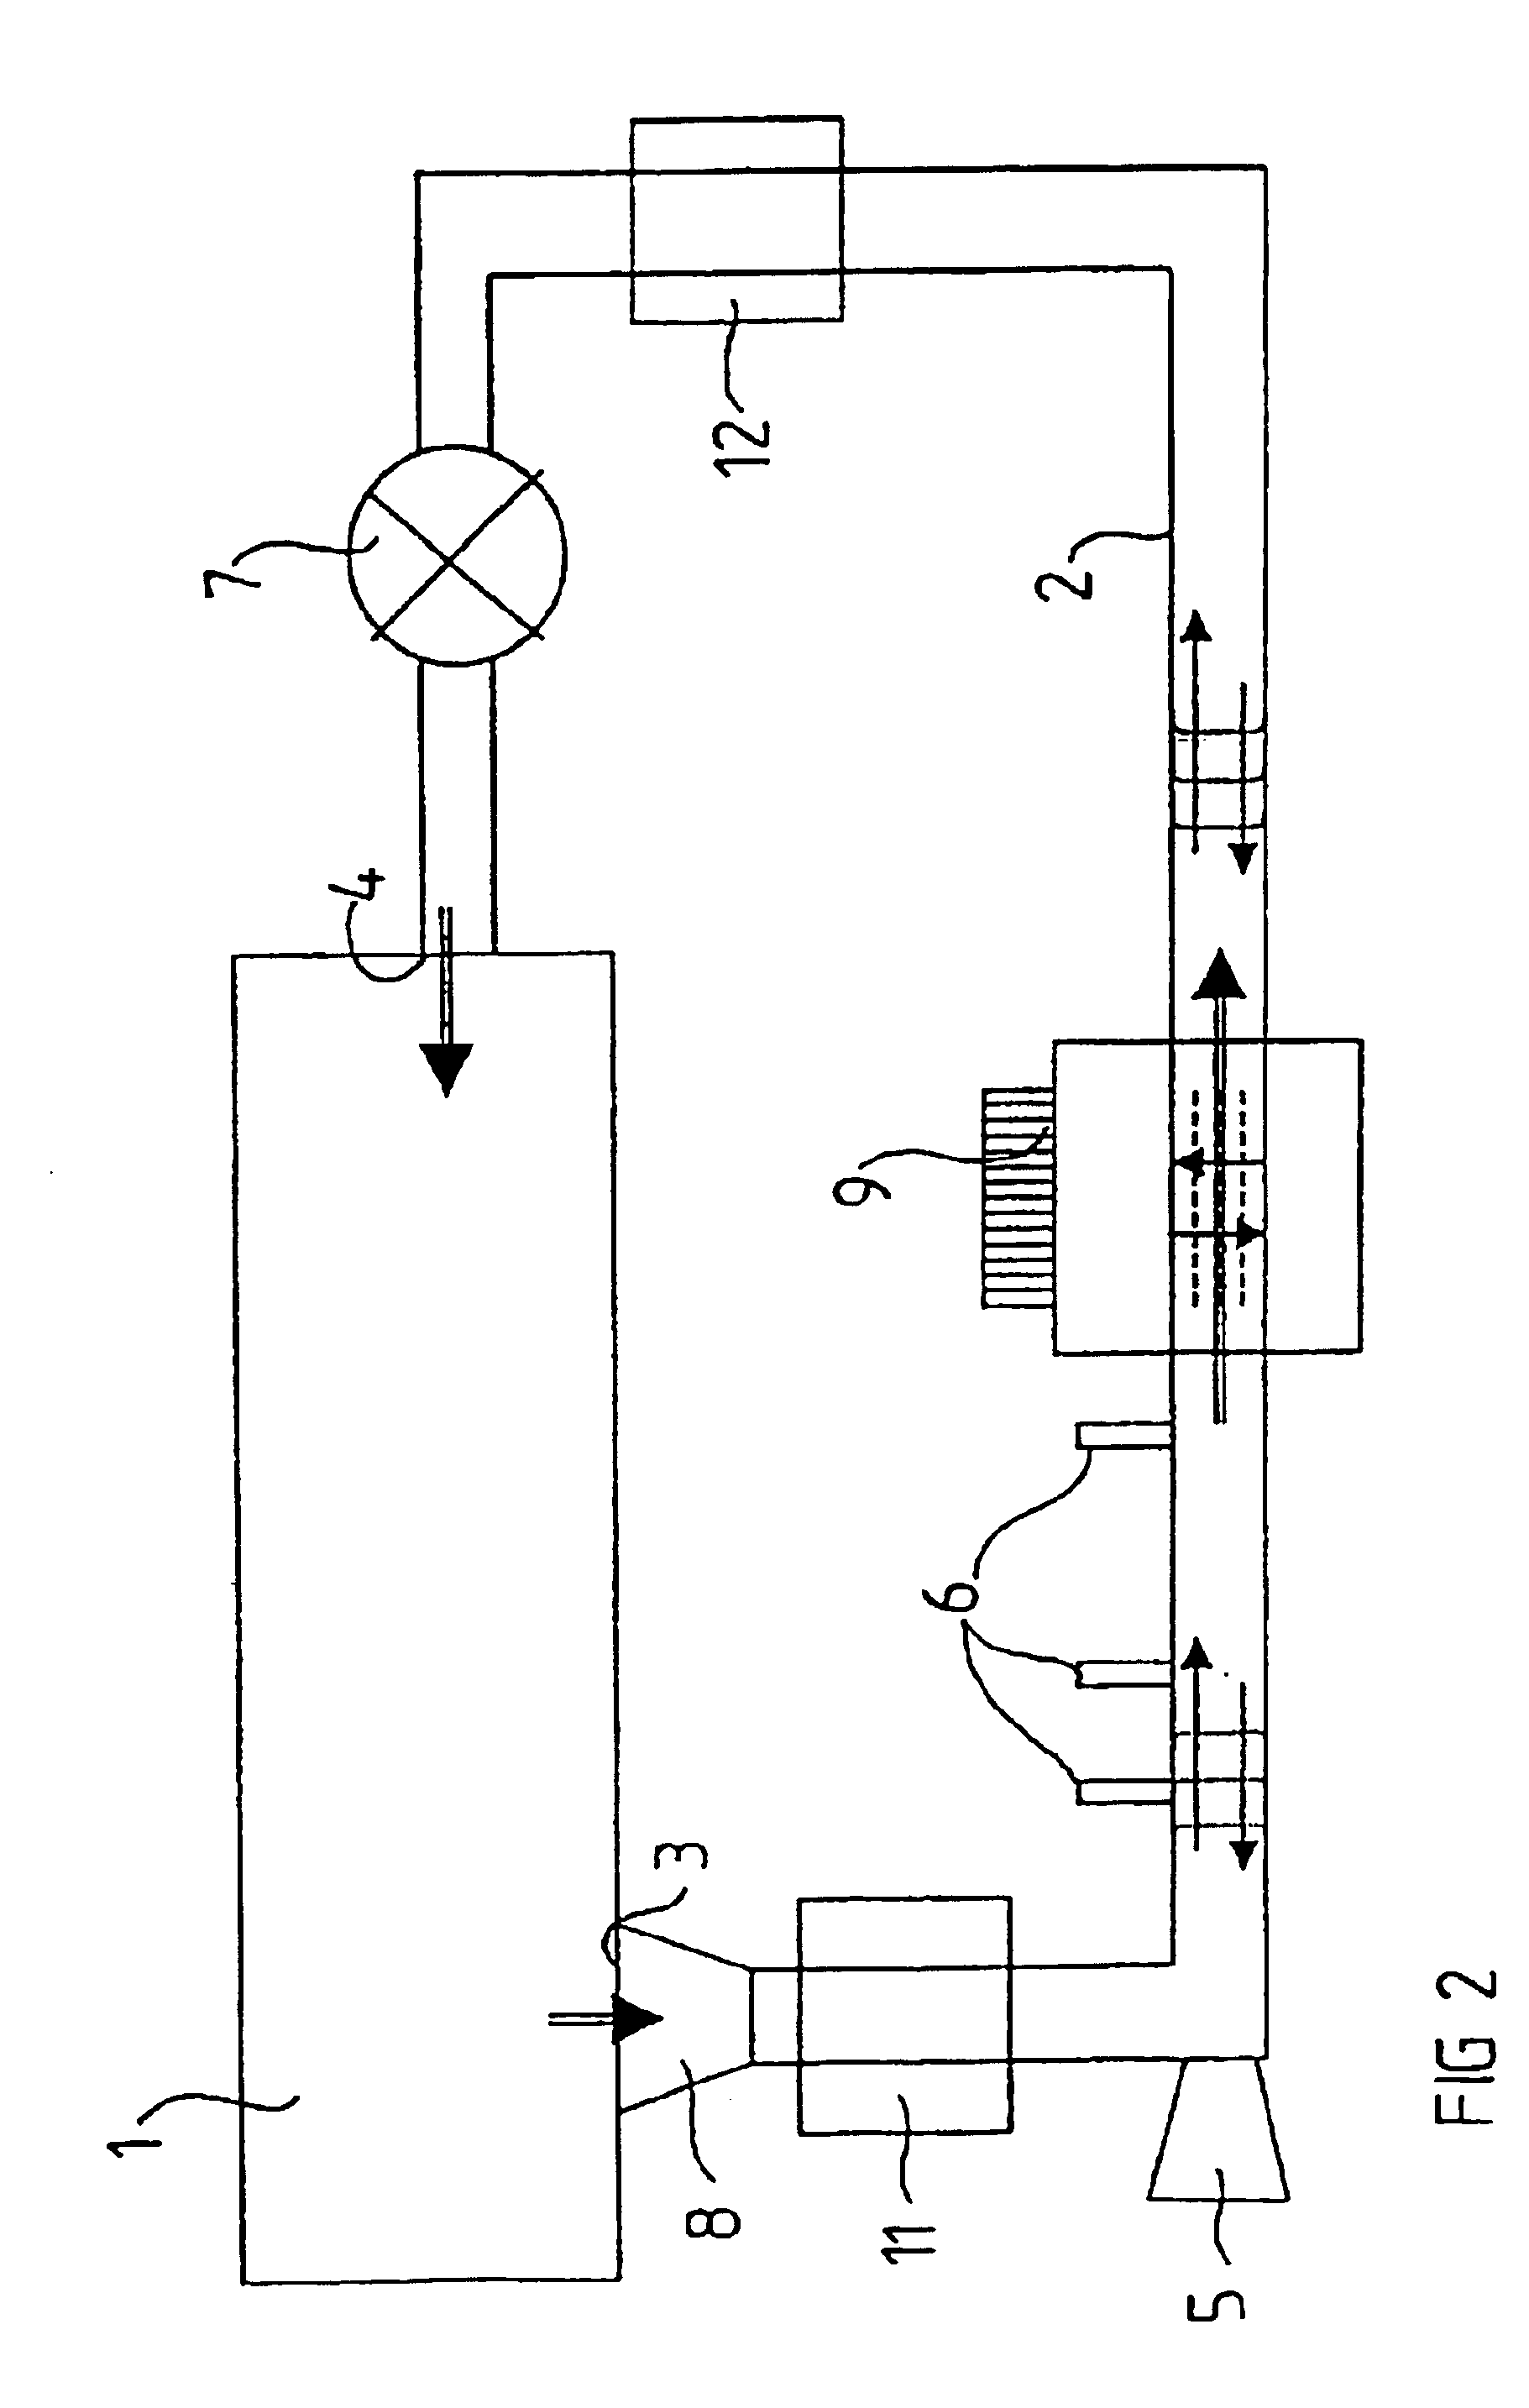 Method and device for monitoring and controlling a process